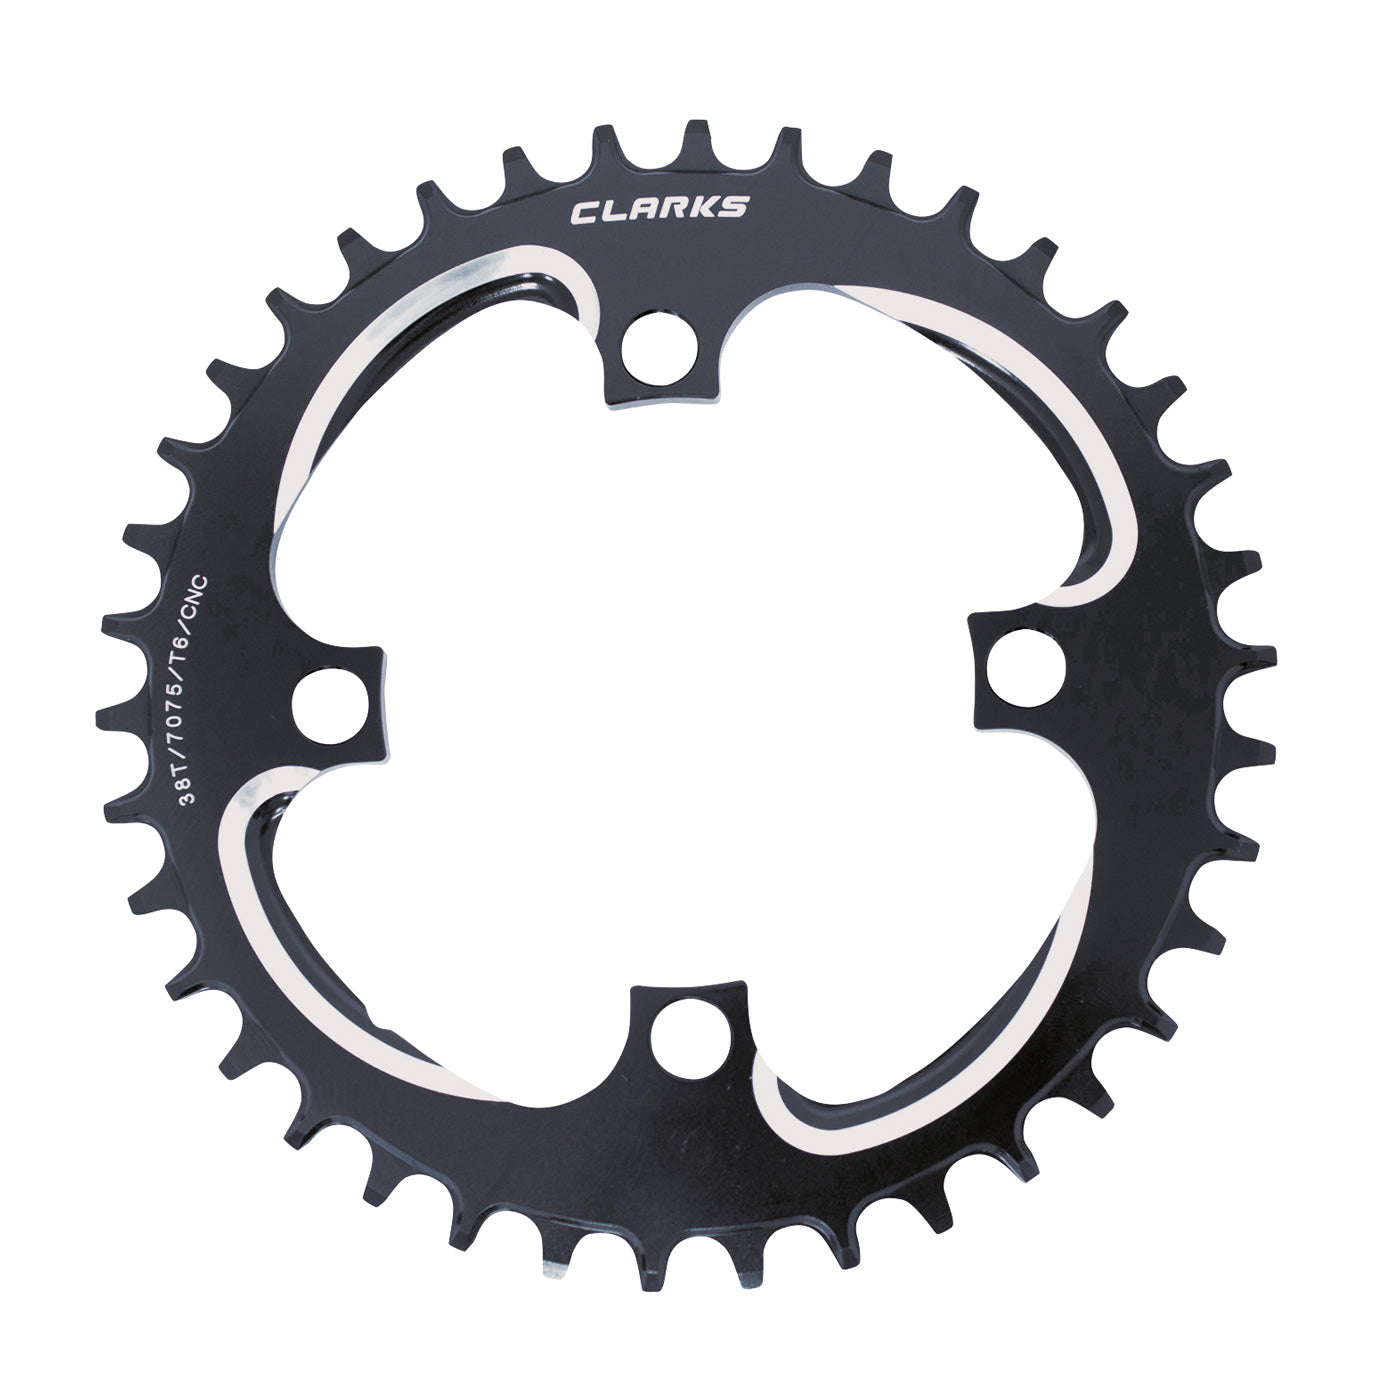 View 4 Bolt Alloy chainring 94BCD 34t information